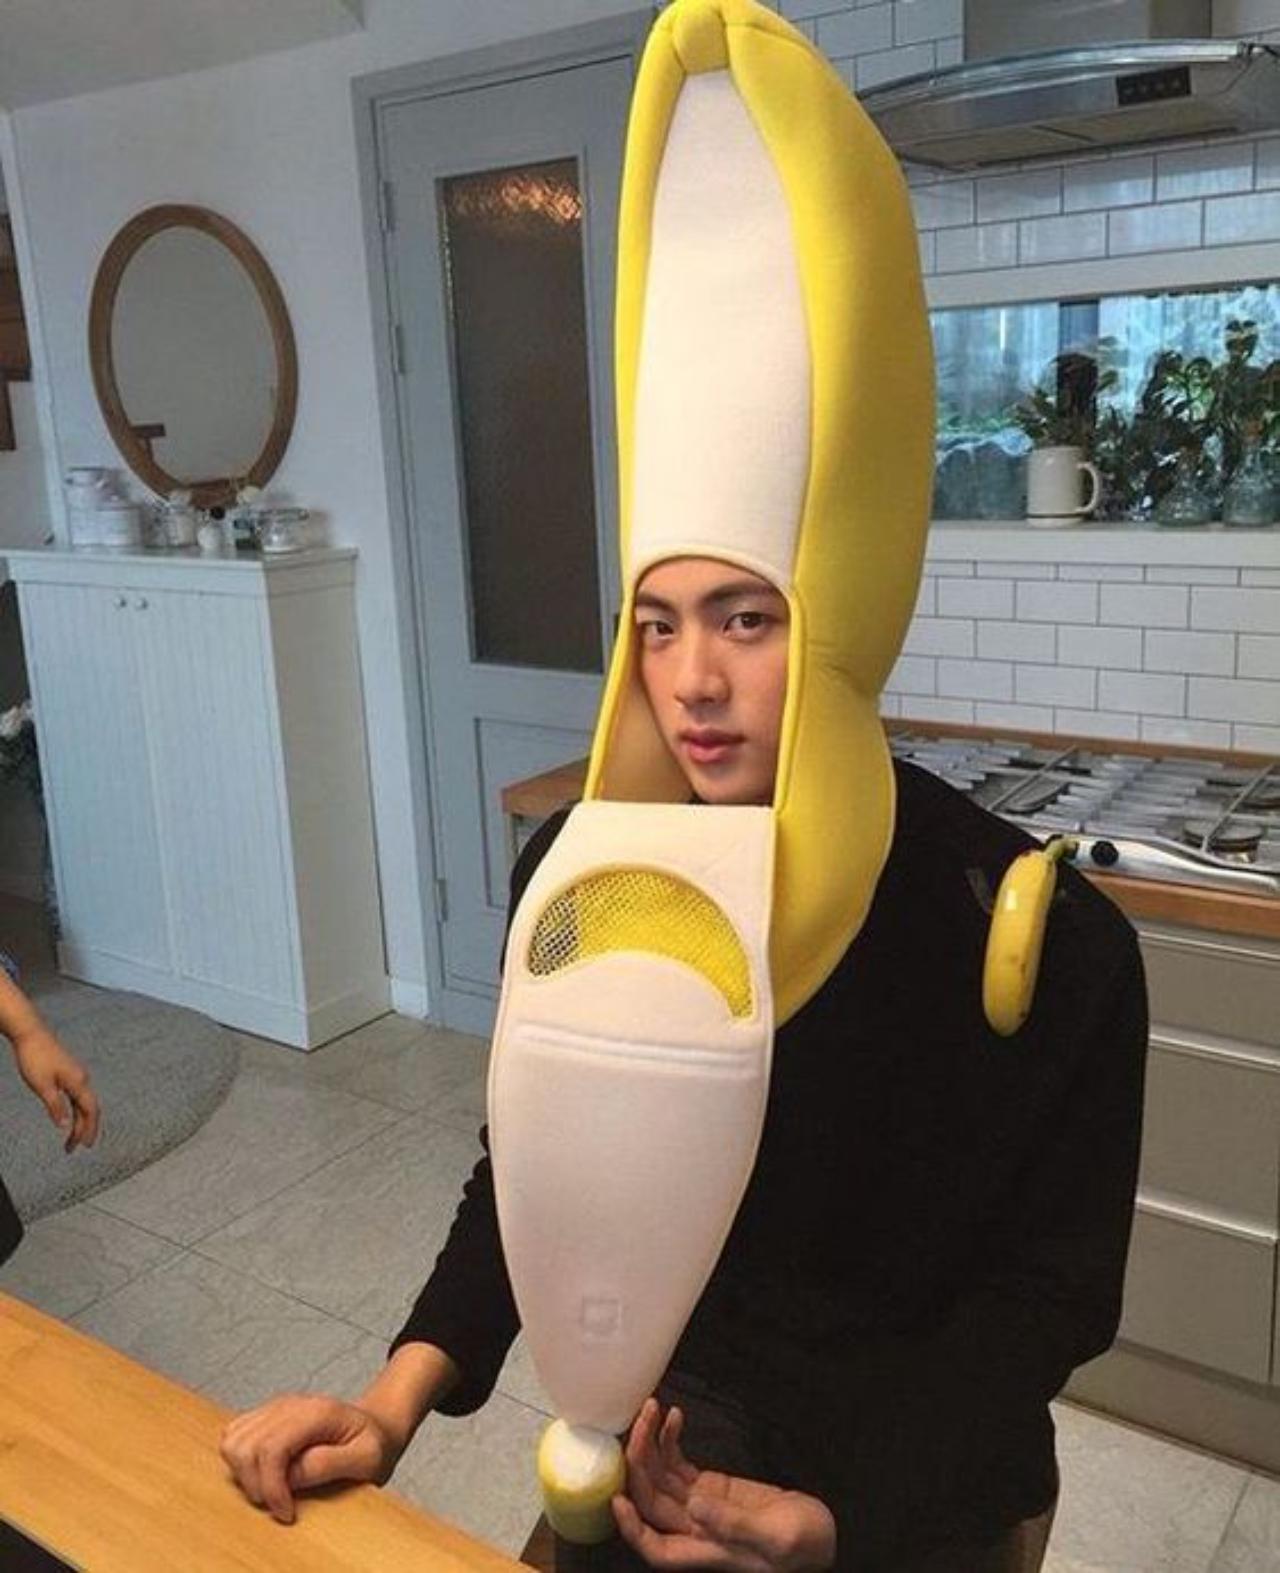 Who can forget the iconic 'House of ARMY' video? Worldwide Handsome Jin was relegated to being household items - from a wall clock to a bananas. We were in 'splits' after watching him in this outfit